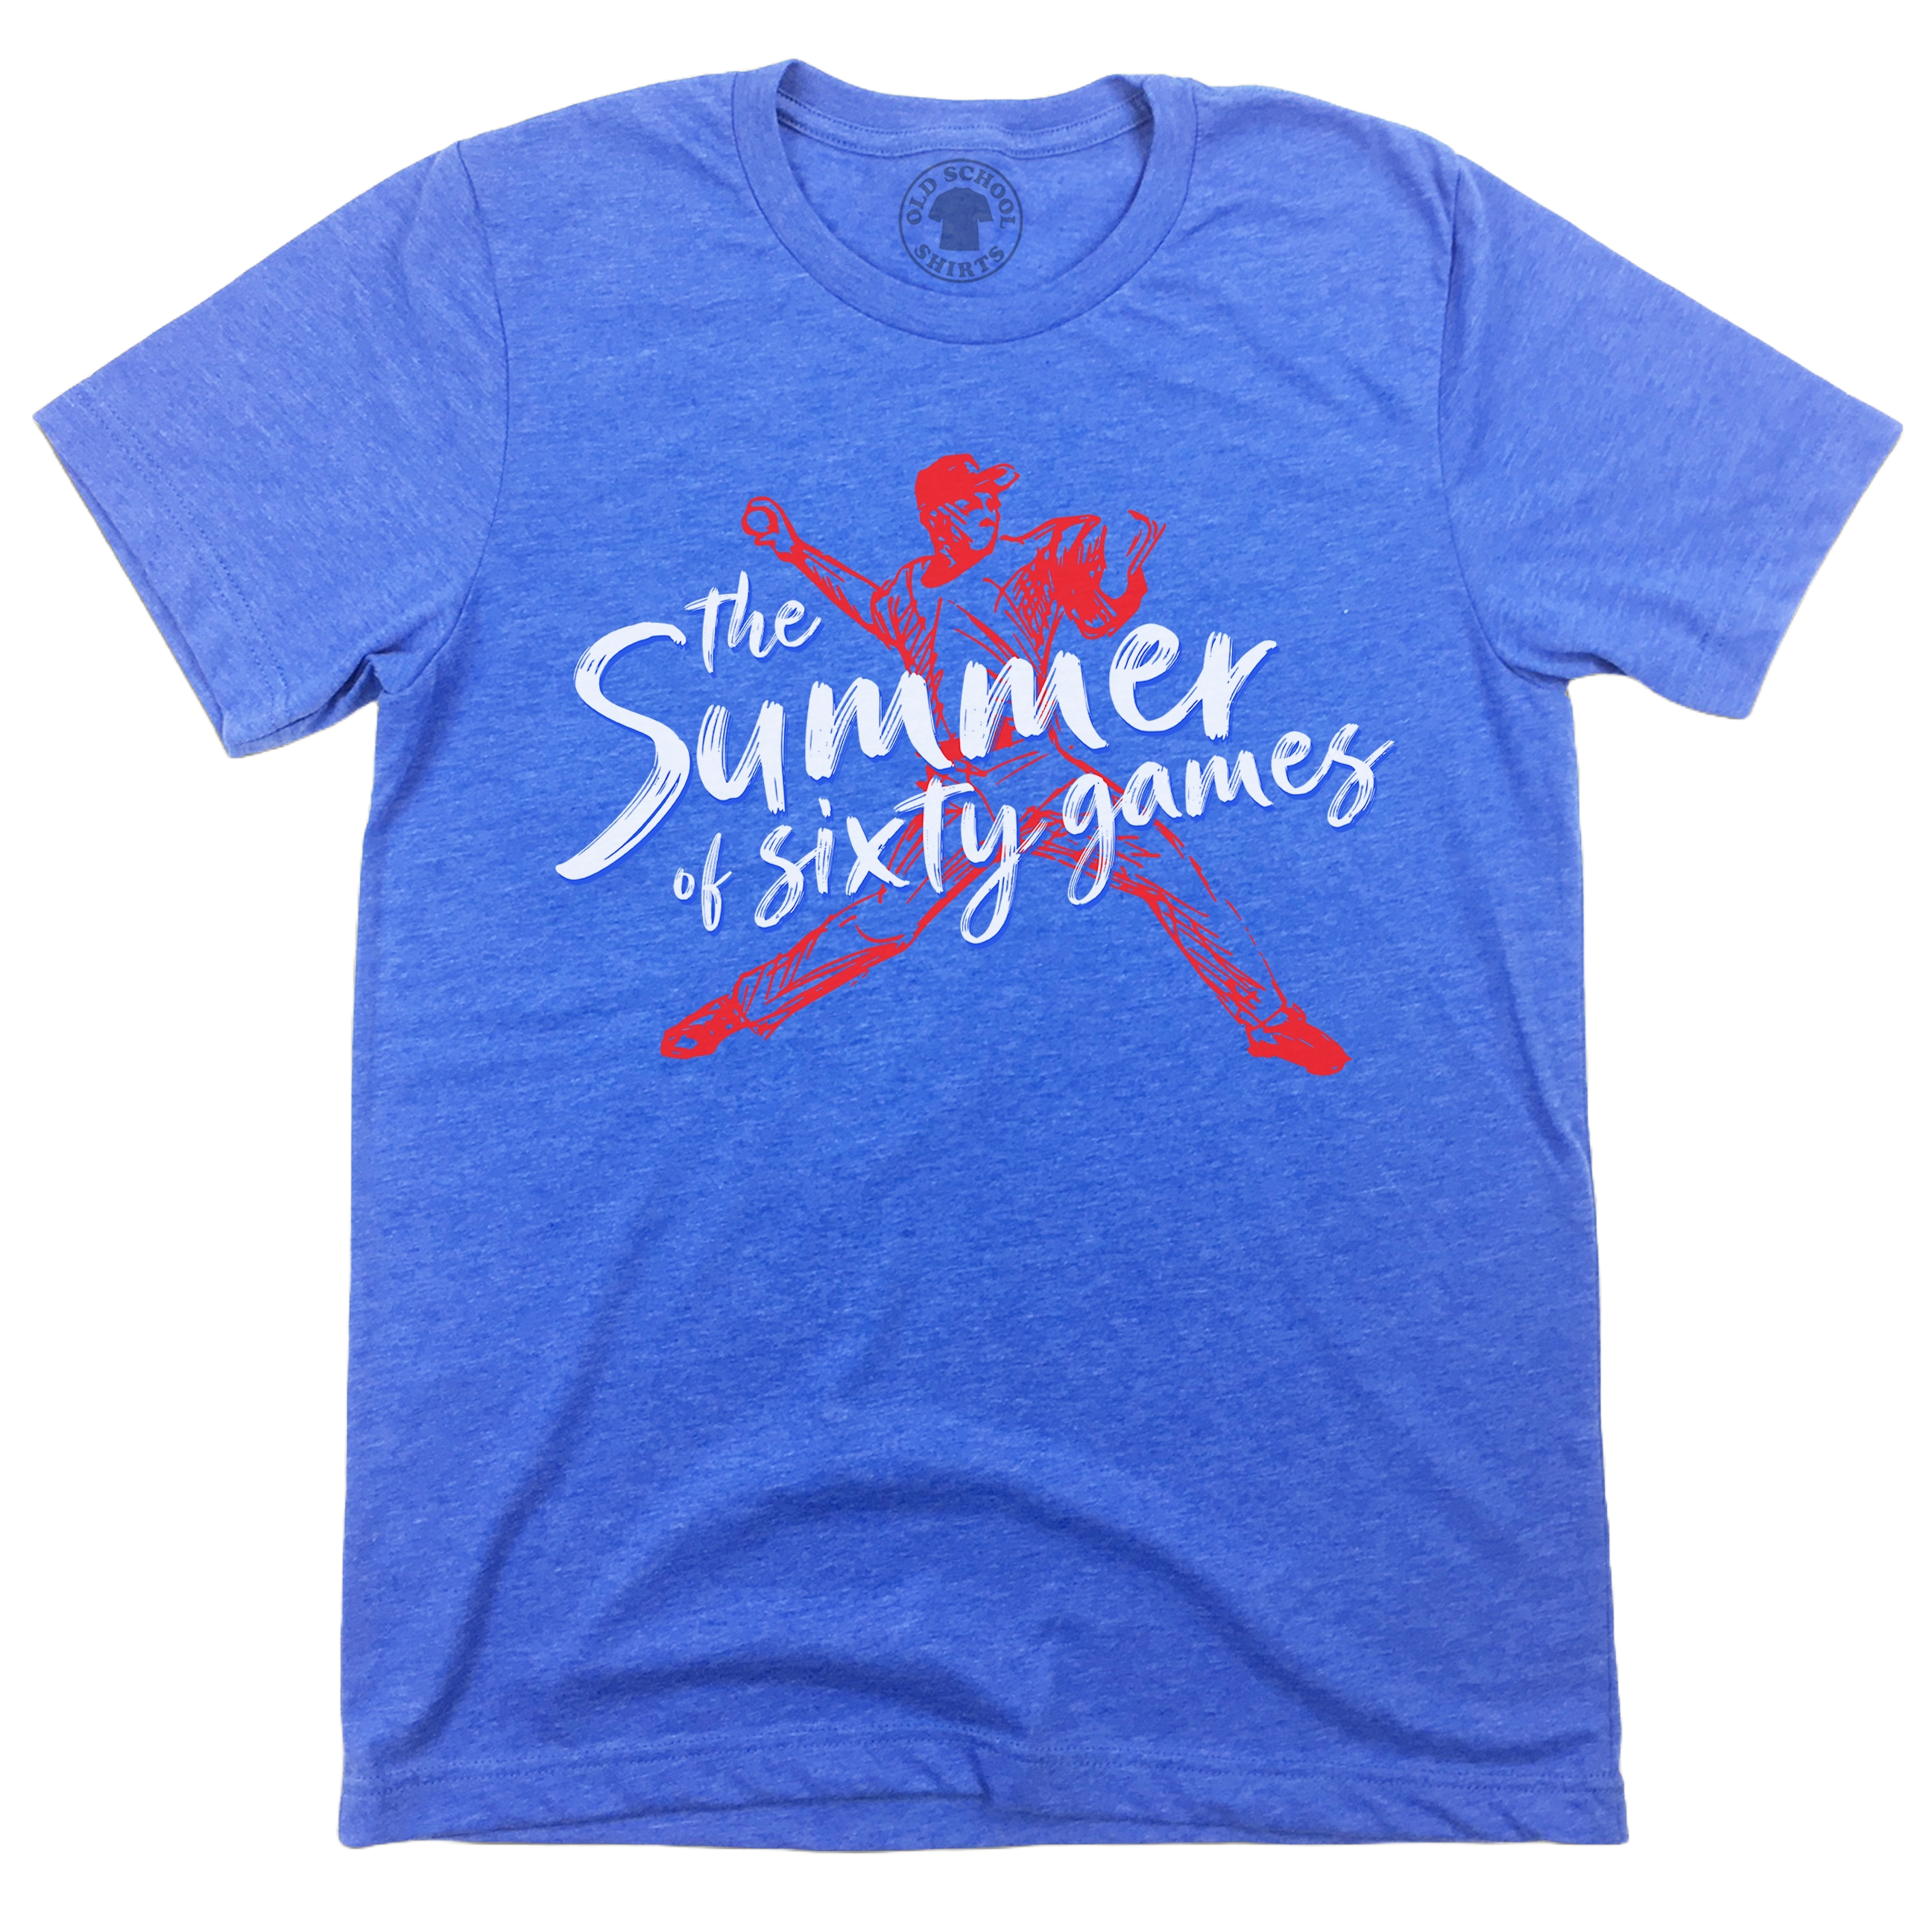 The Summer of Sixty Games - Royal Blue Tee